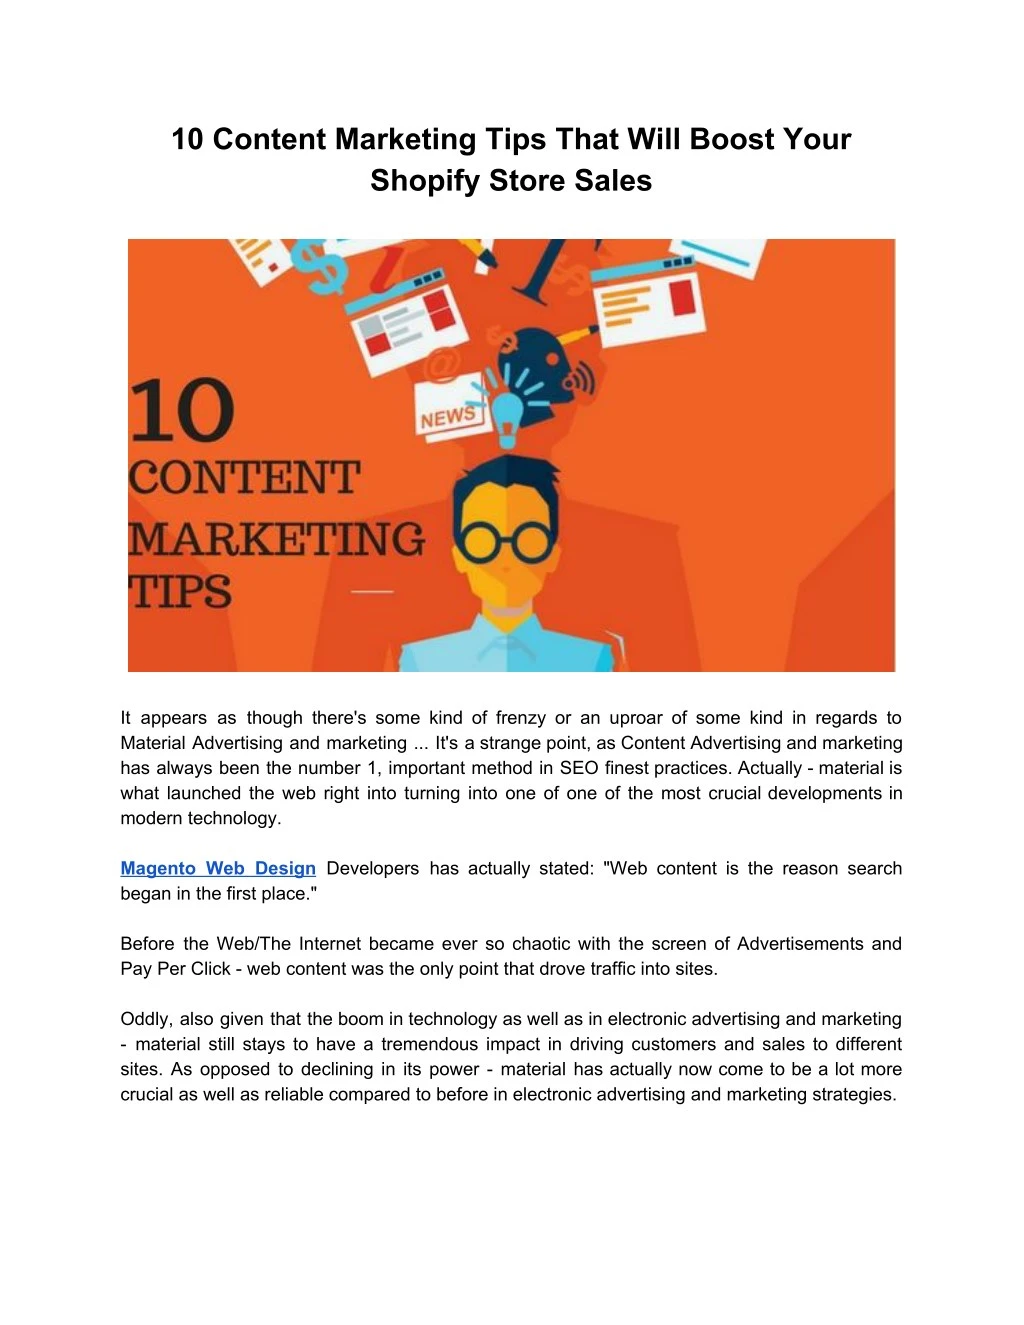 10 content marketing tips that will boost your